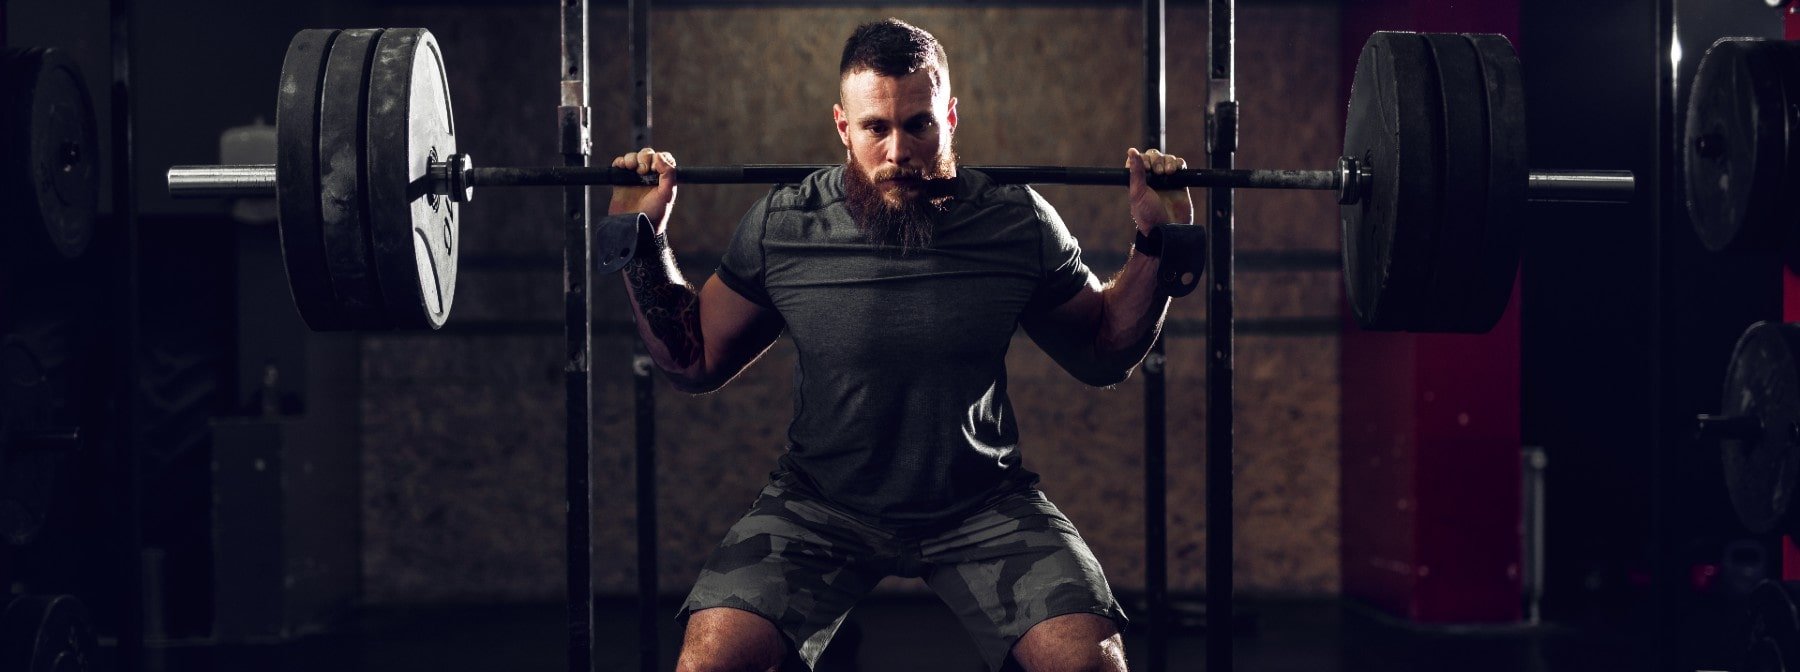 What's The Best Squat For Muscle Growth?, Barbell vs Smith Machine